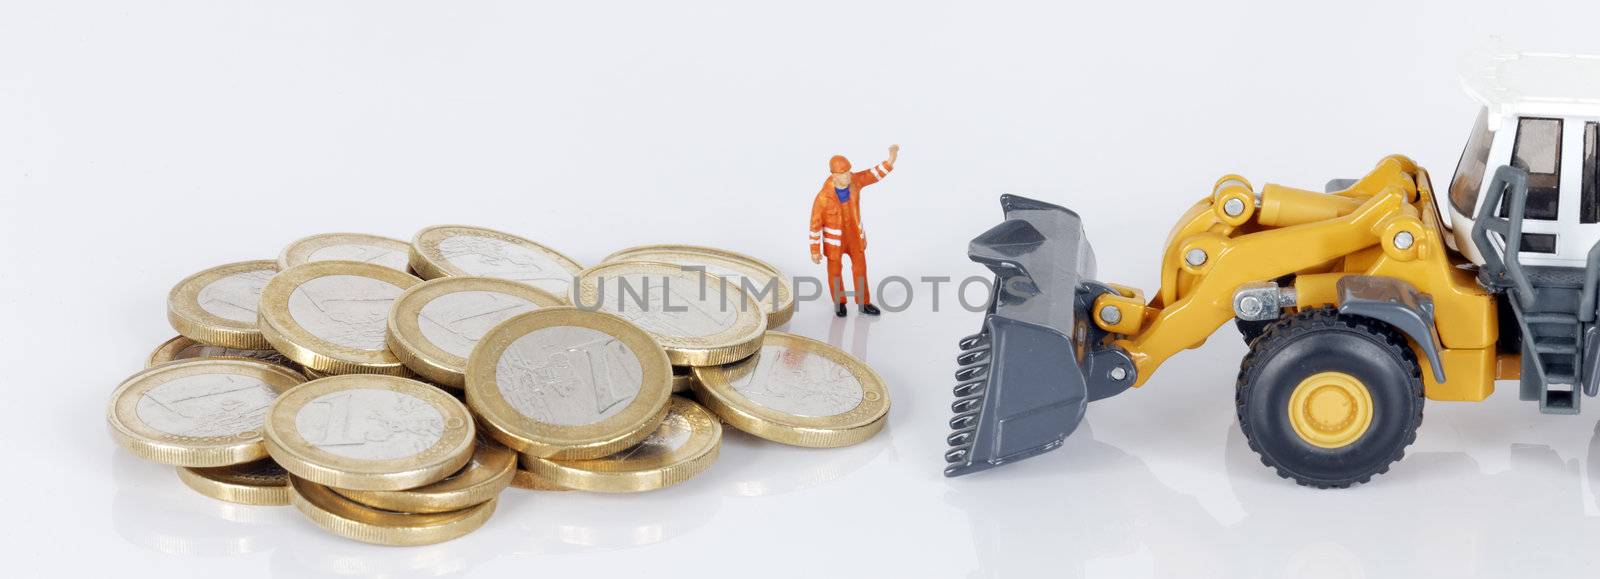 euro money coins with loader on white background 